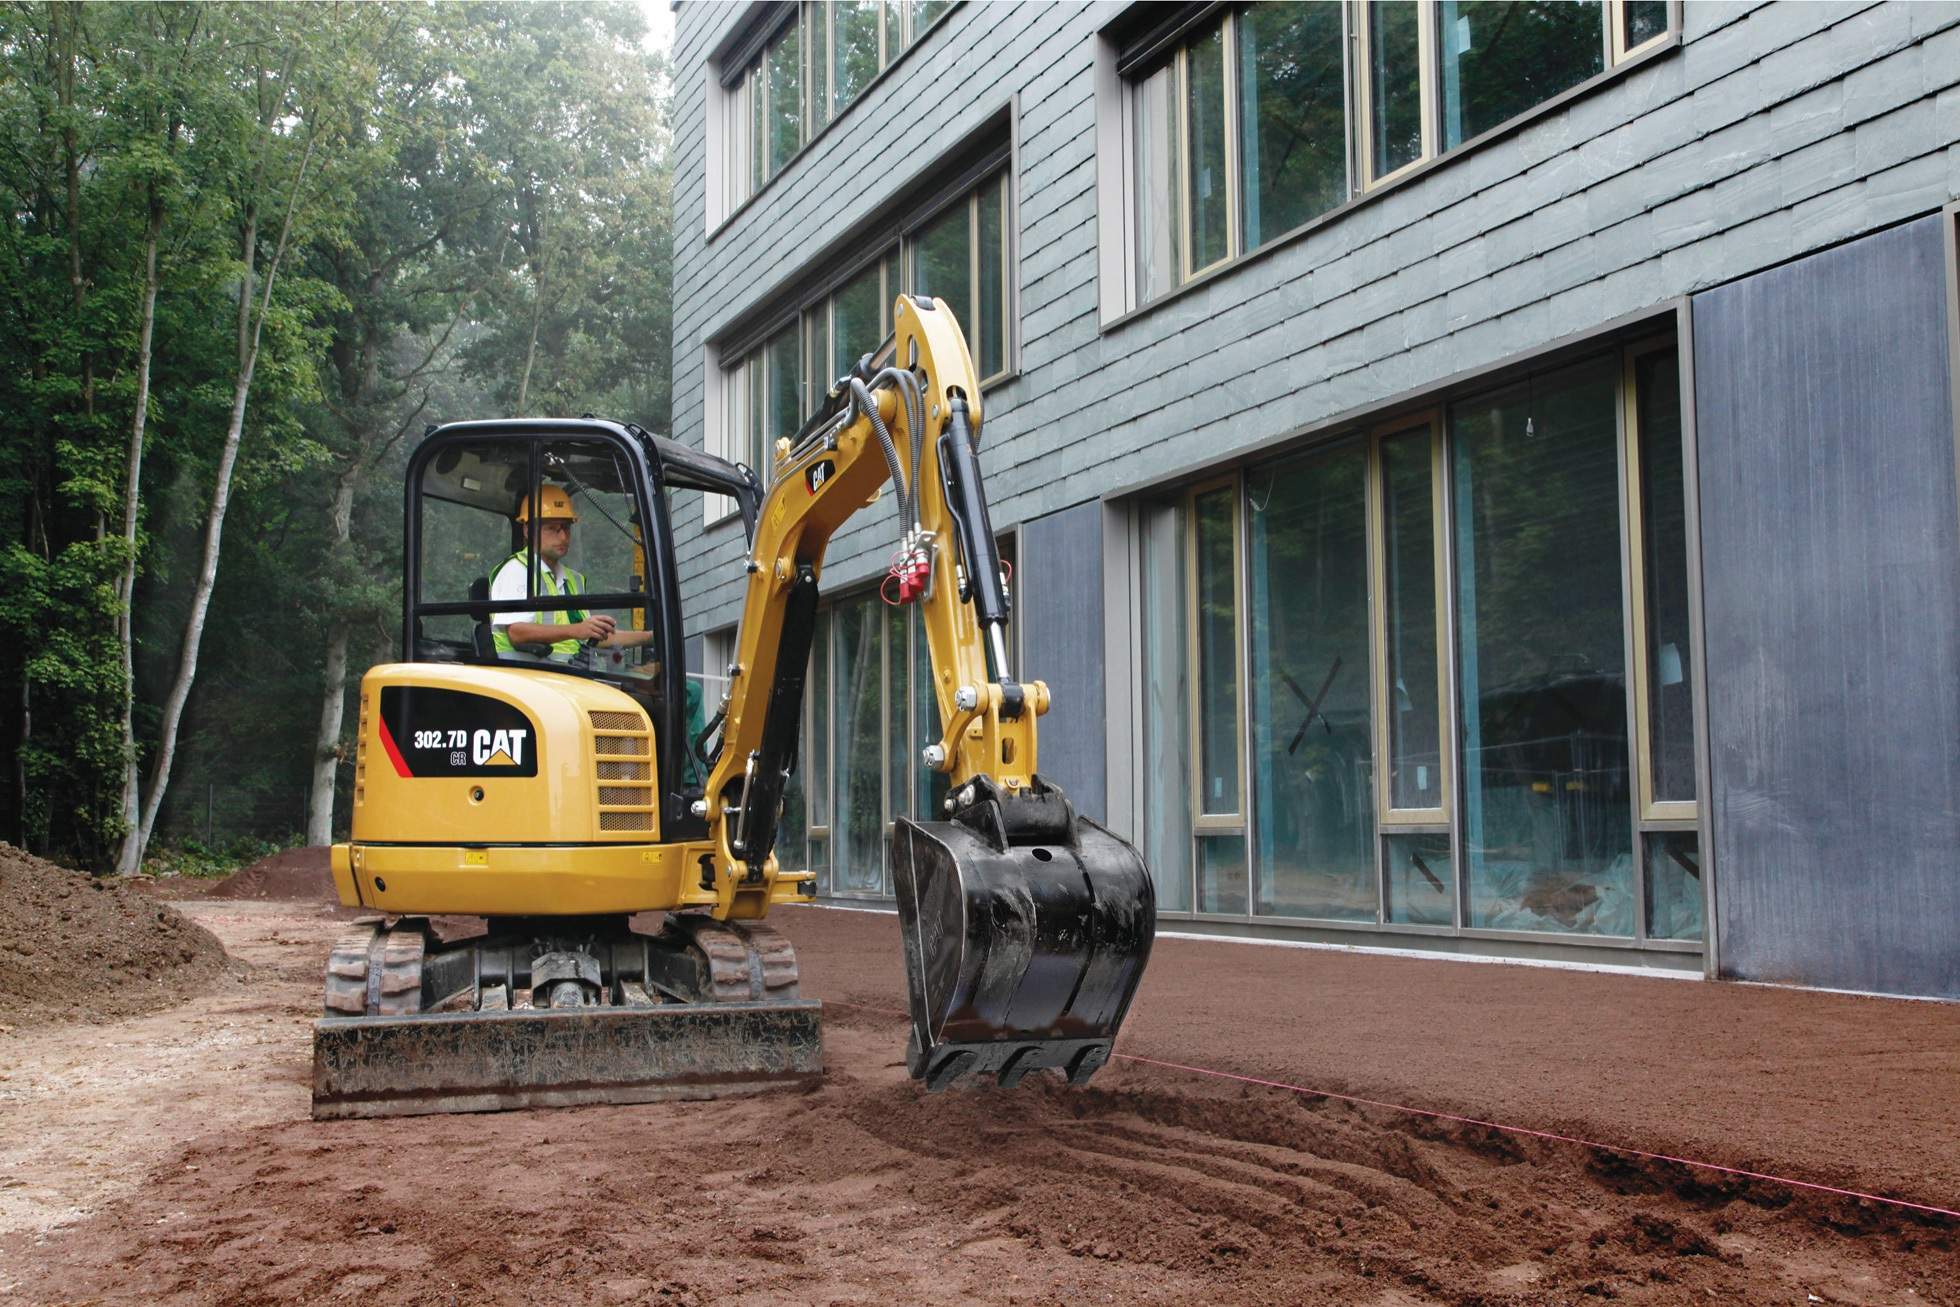 Backhoe vs Mini Excavator: What Are the Differences?